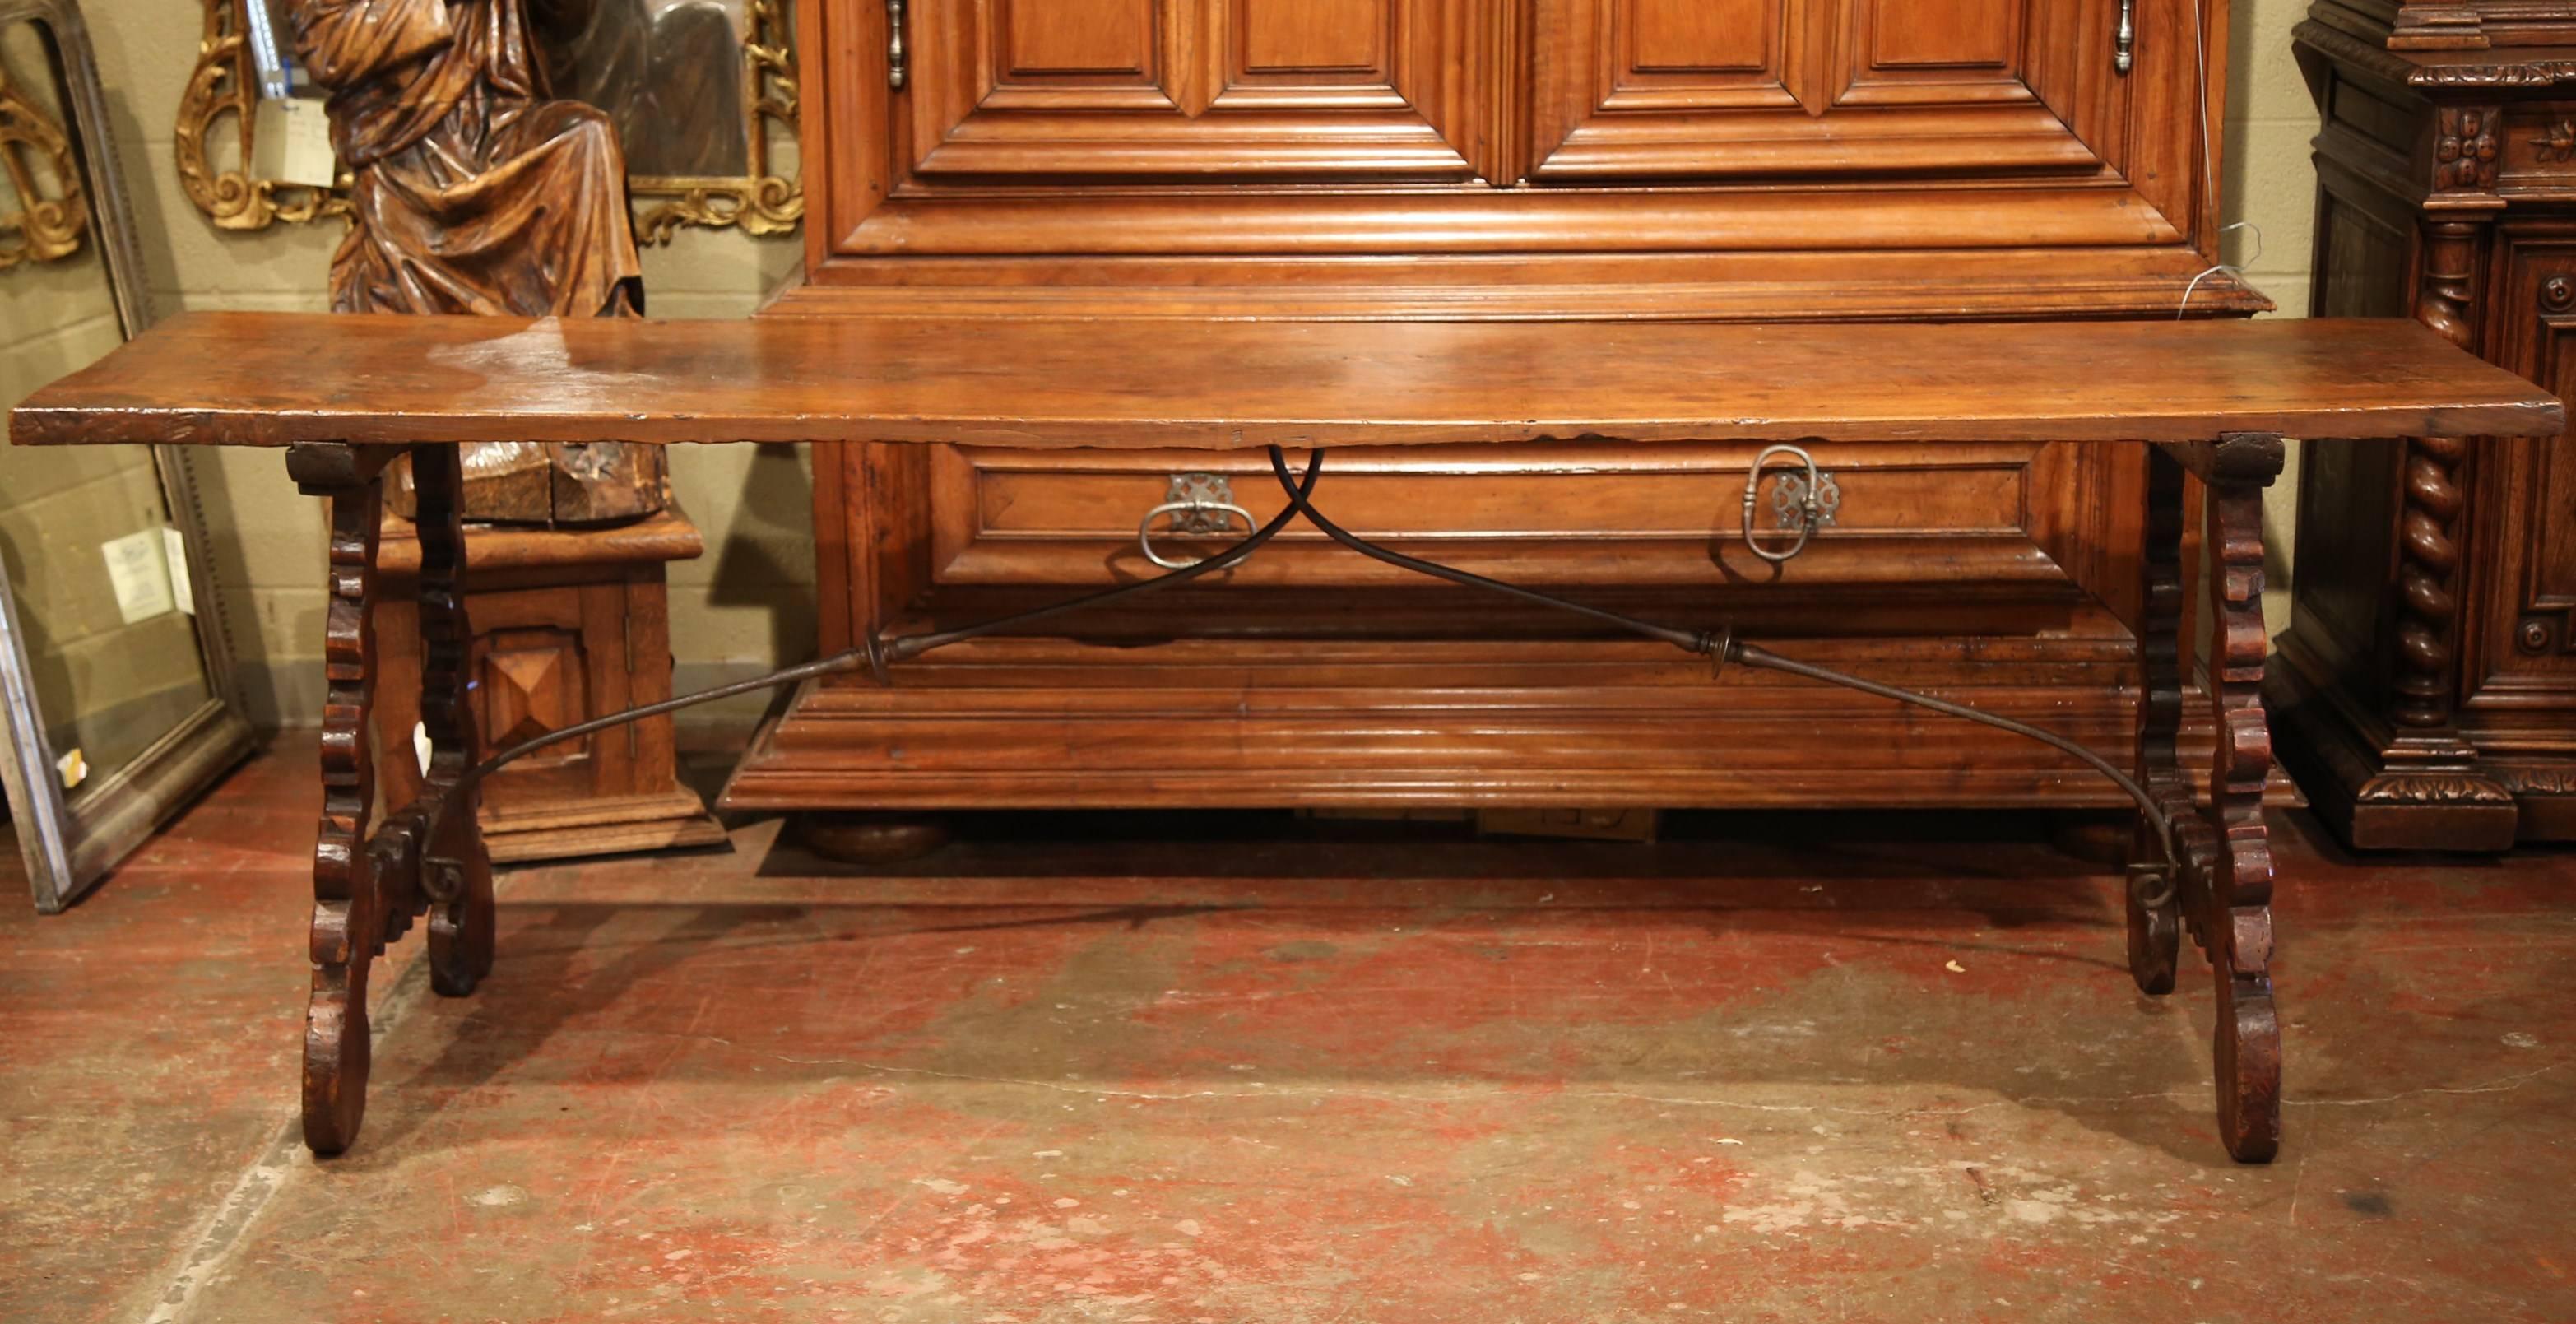 Hand-Carved 18th Century Spanish Carved Chestnut Console Table with Wrought Iron Stretcher